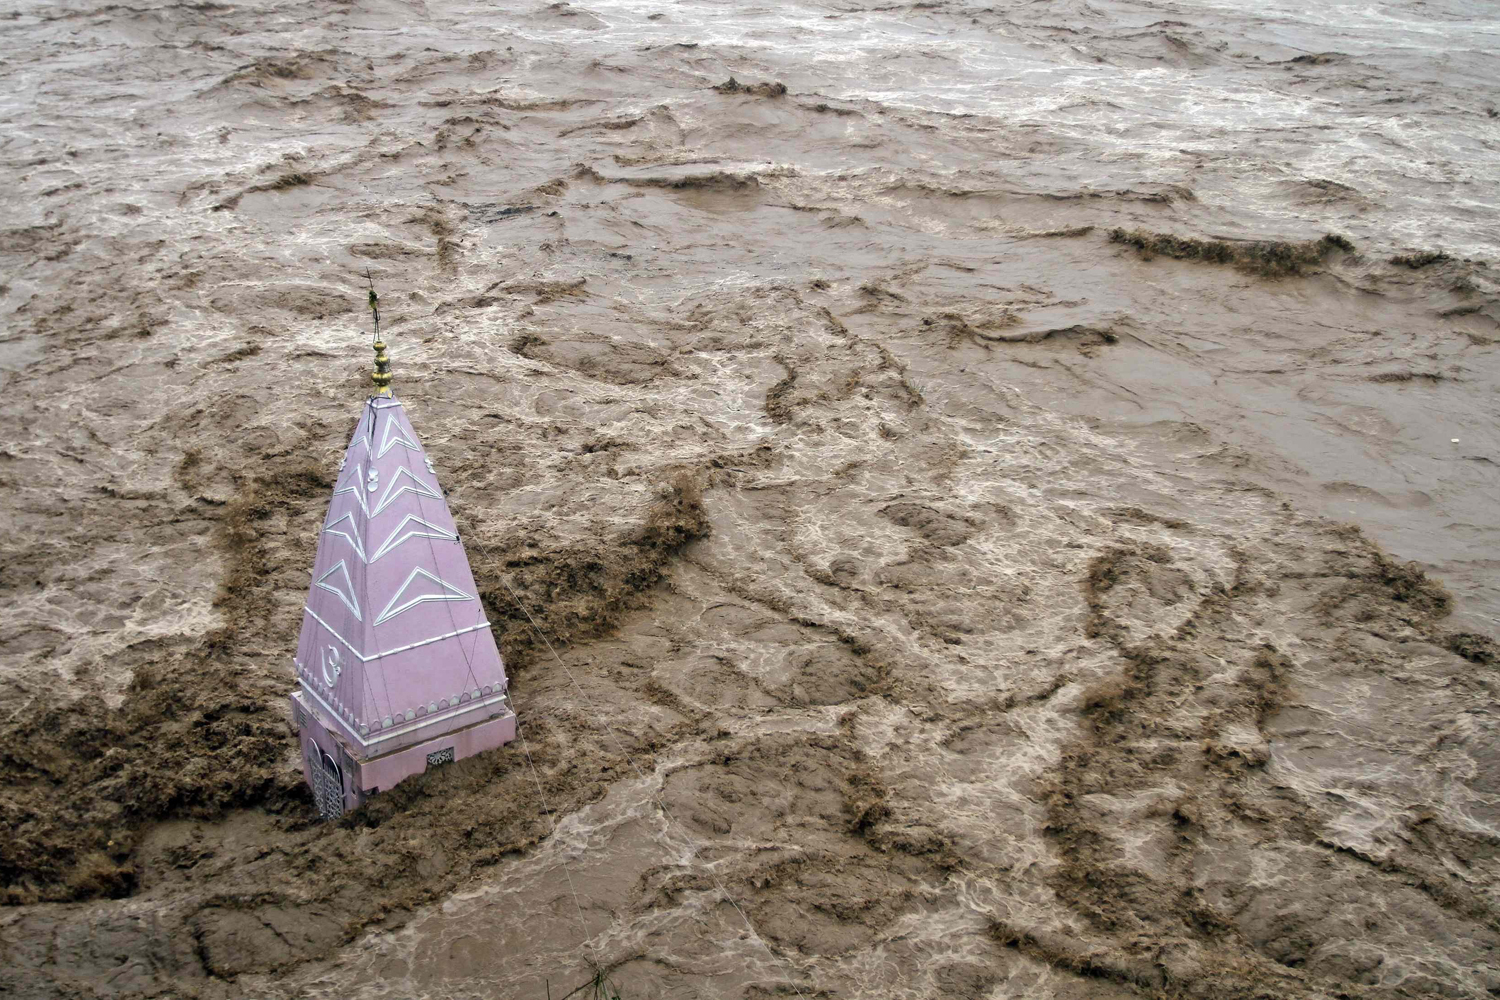 Sept. 6, 2014. A temple stands amid the waters of the overflowing river Tawi during heavy rains in Jammu. Authorities declared a disaster alert in the northern region after heavy rain hit villages across the Kashmir valley, causing the worst flooding in two decades.